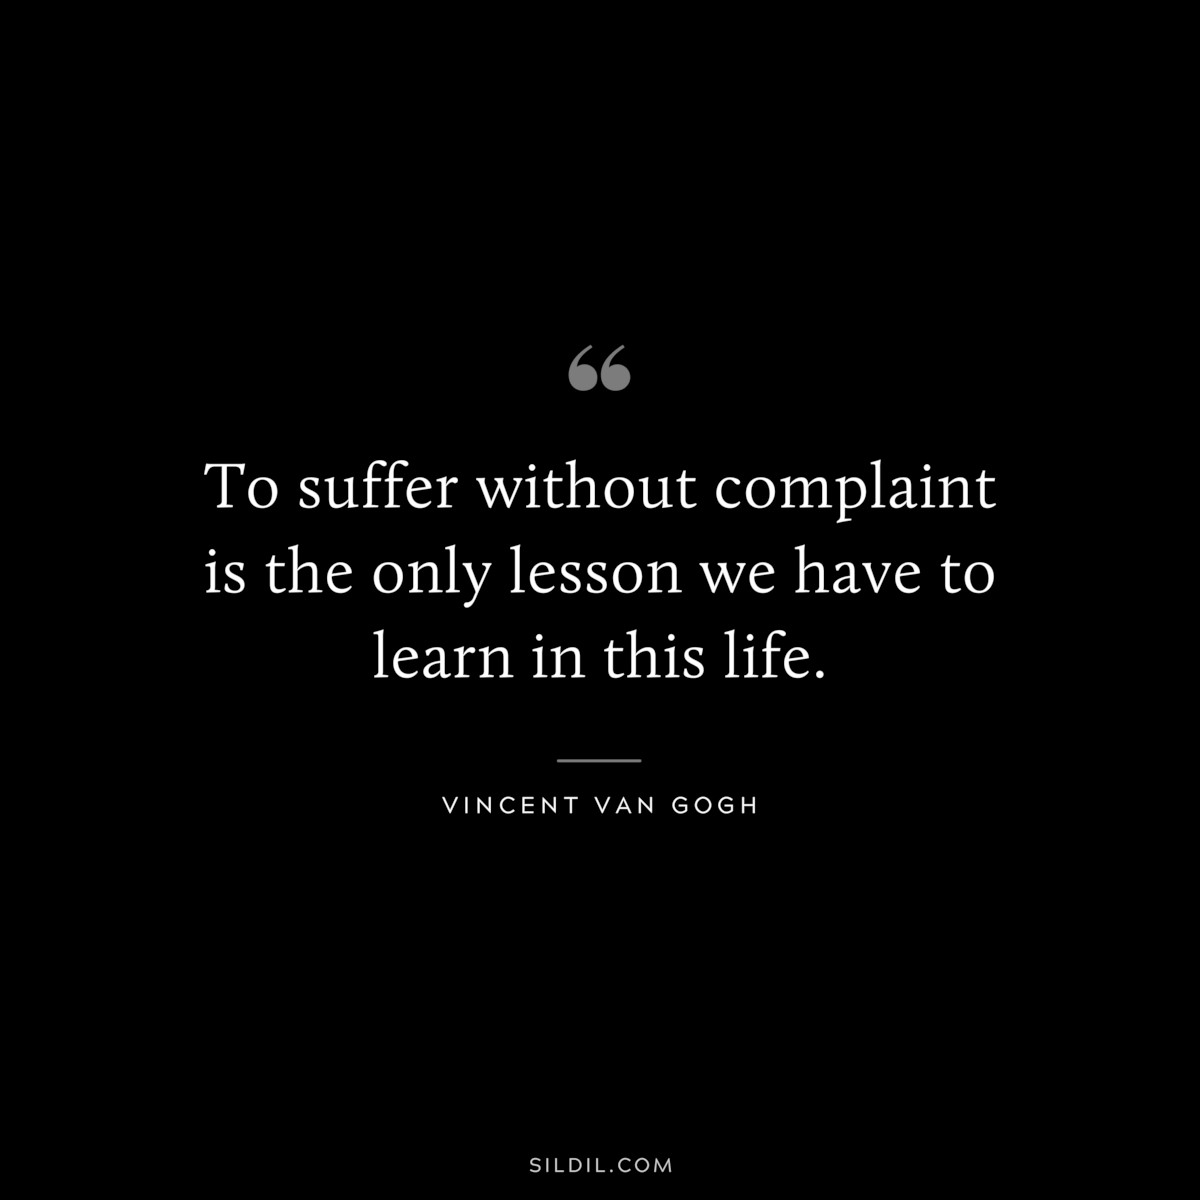 To suffer without complaint is the only lesson we have to learn in this life. ― Vincent van Gogh